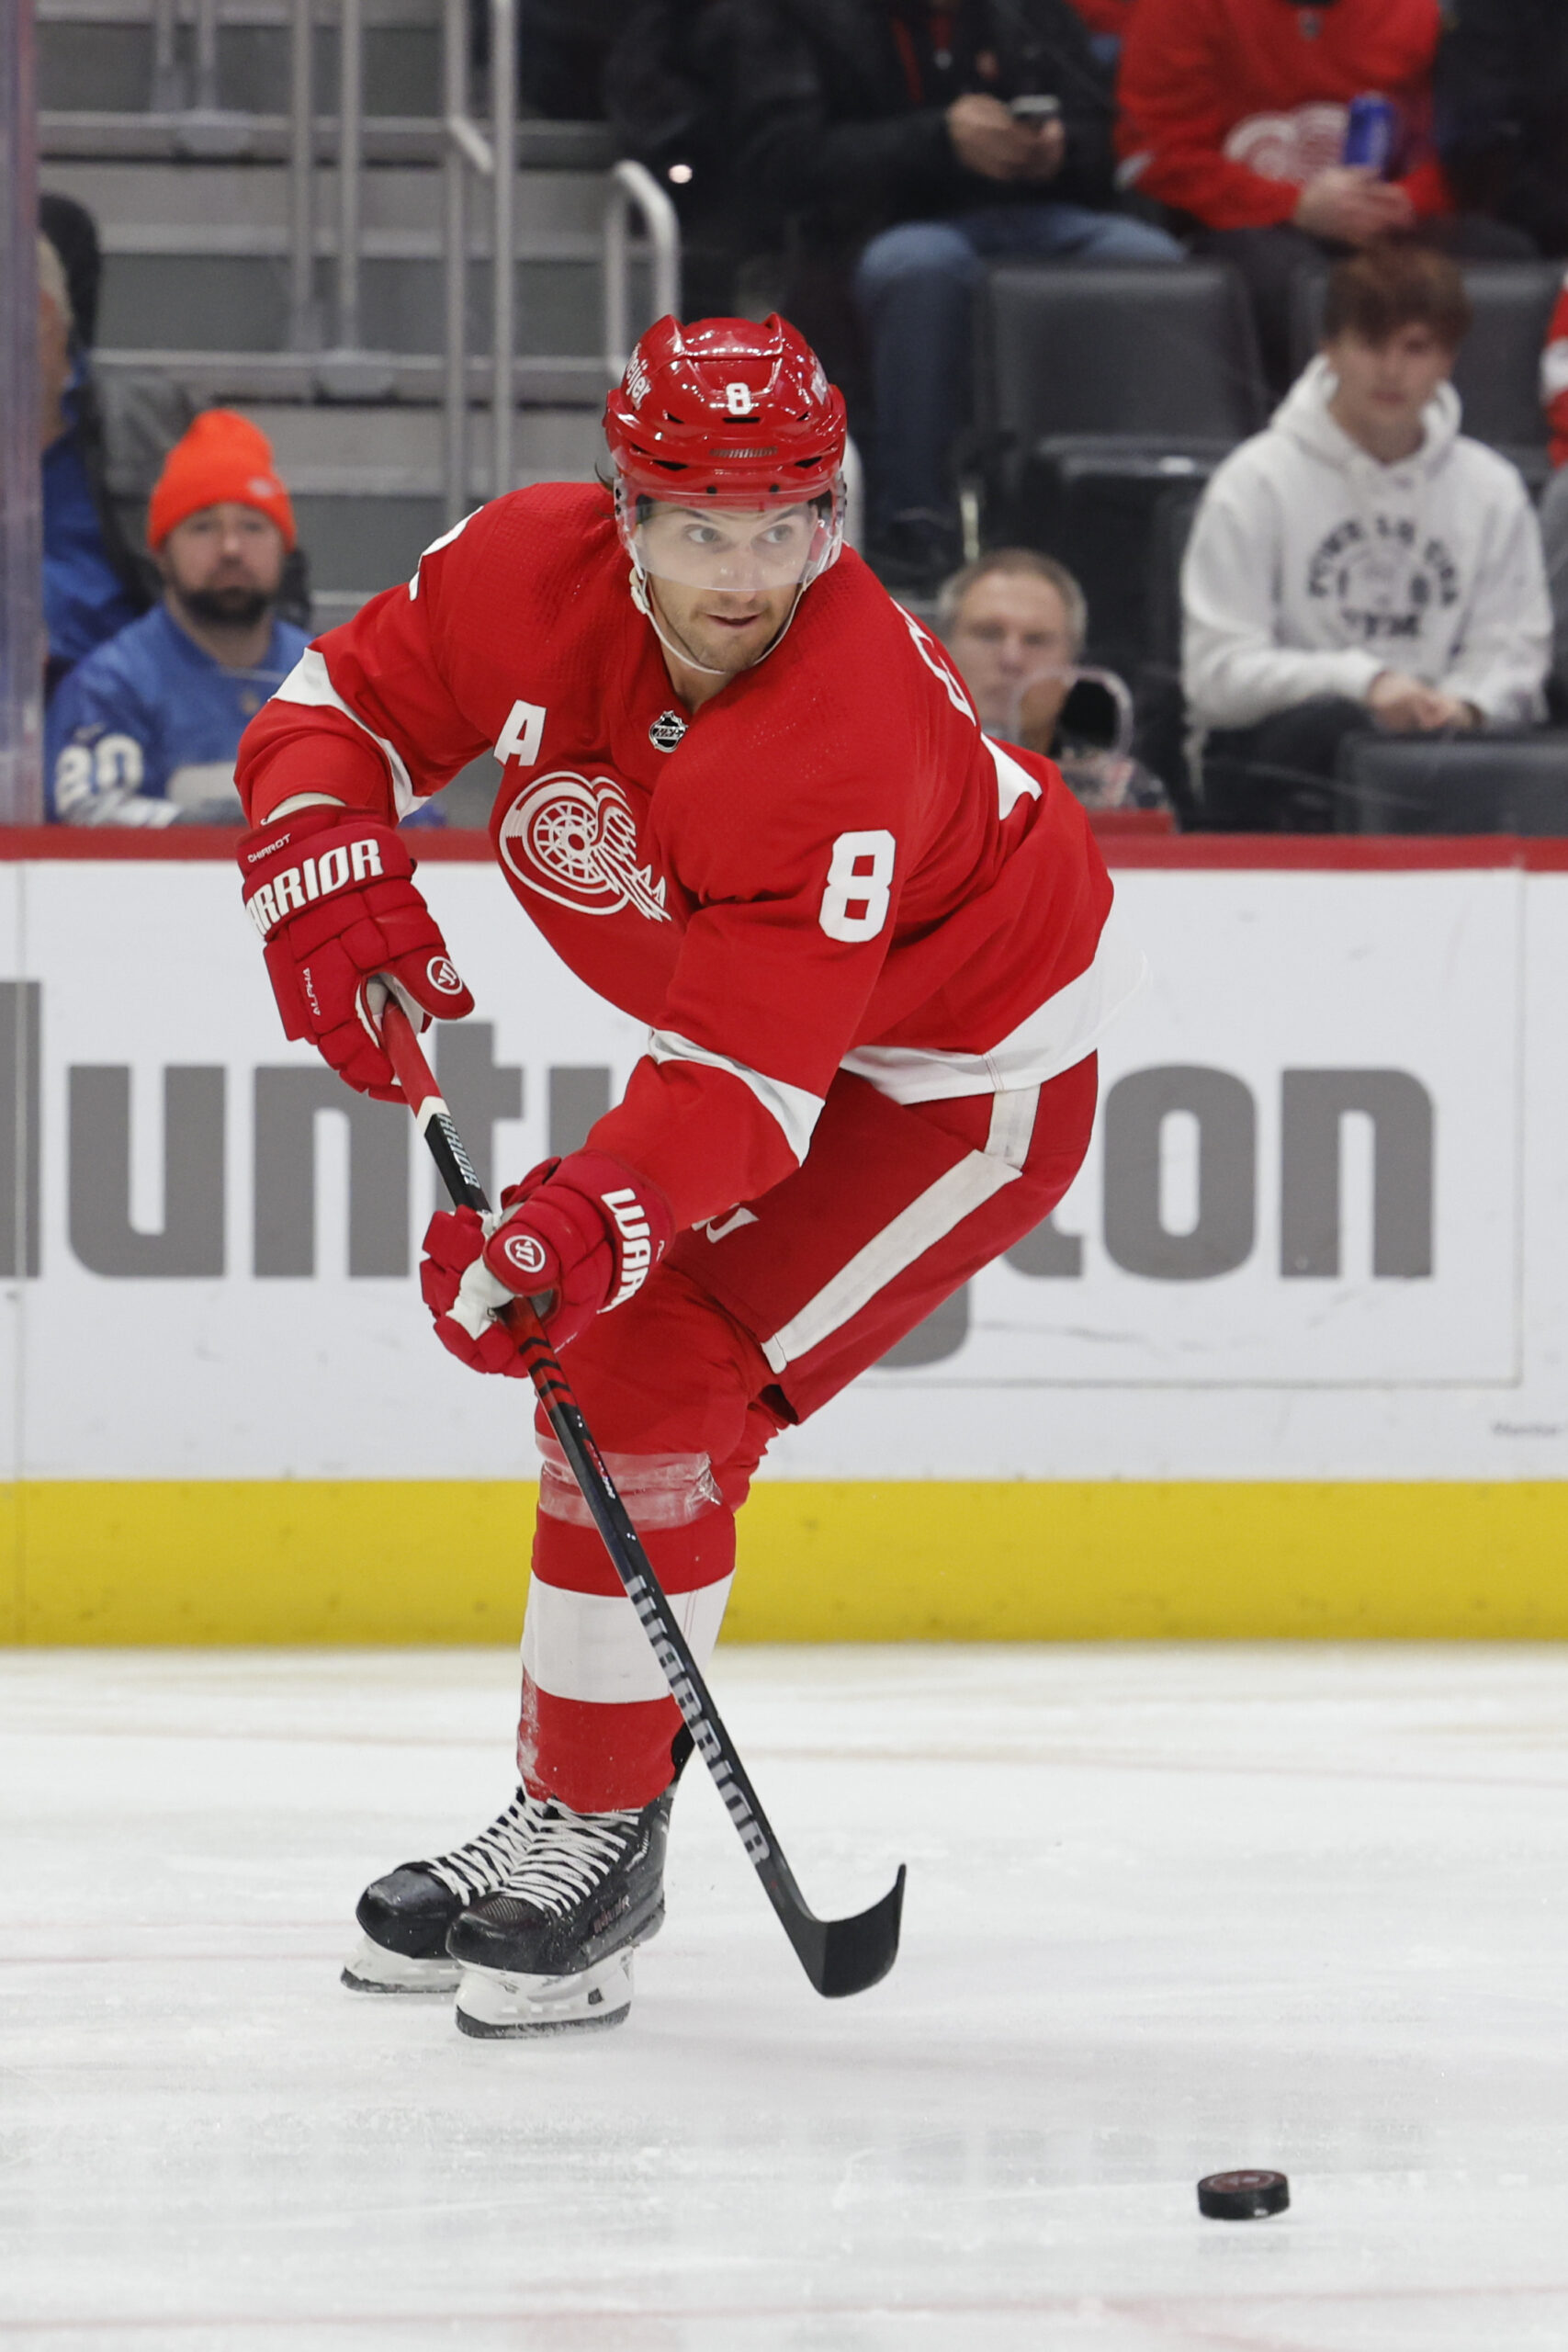 Extremely valuable' Ben Chiarot back in Detroit Red Wings lineup